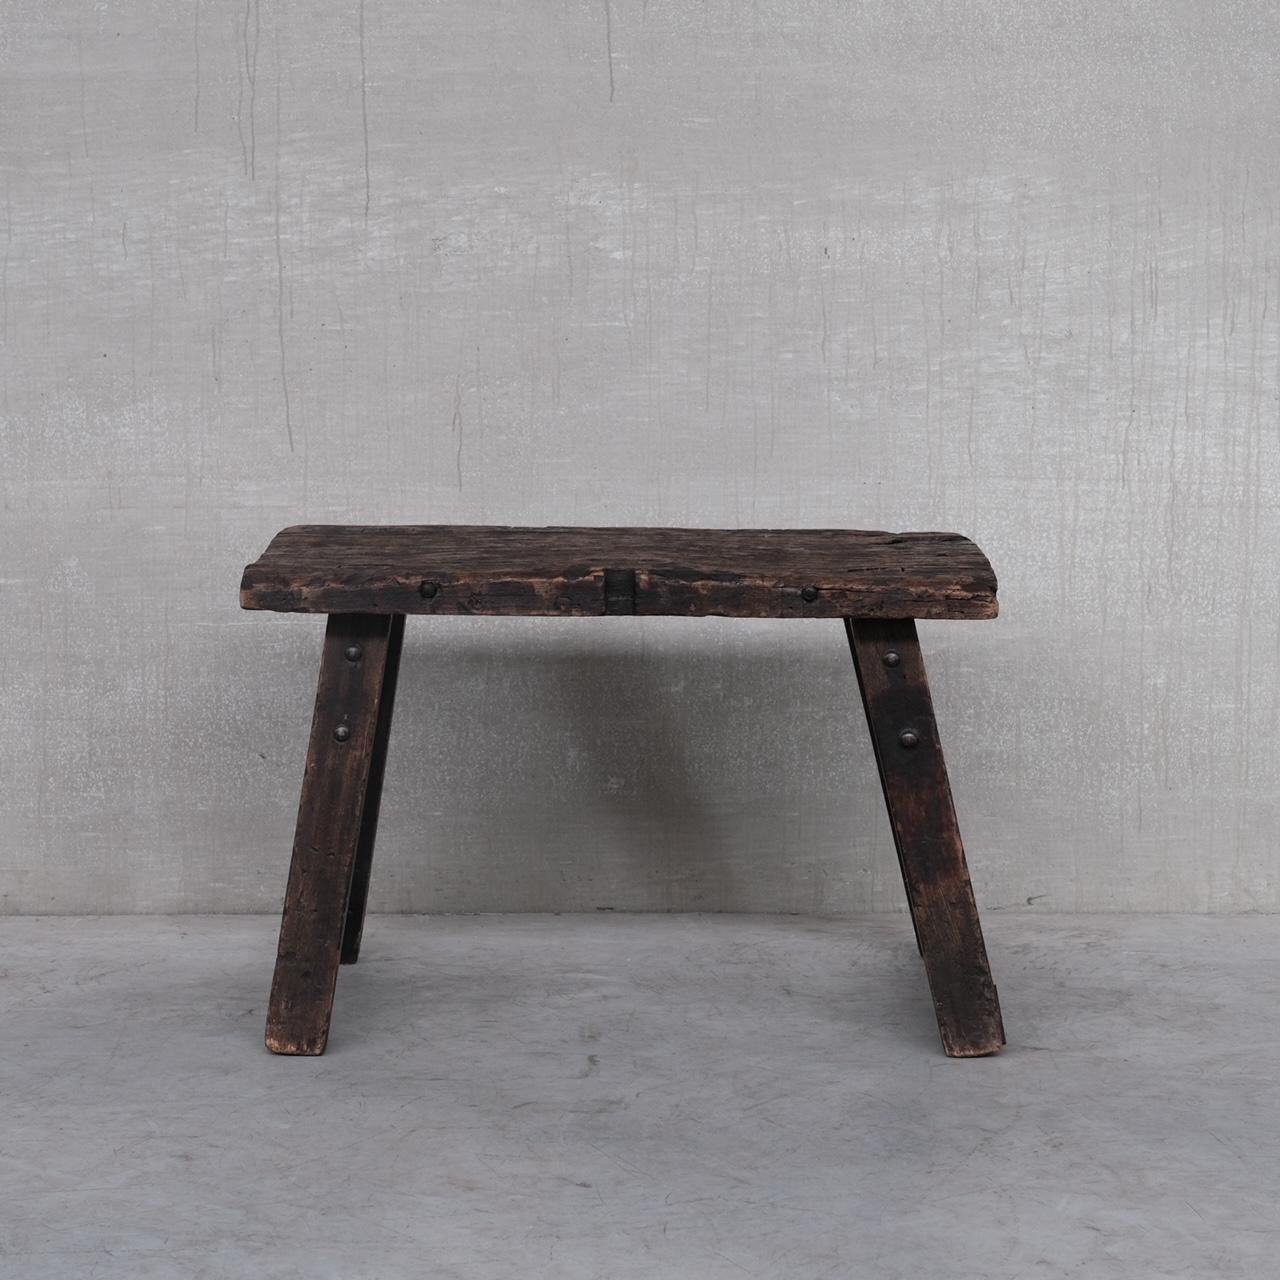 An antique work table. 

France, c1920s. 

Lots of character and wear imprinted over years. It could be used as a desk or display table or as a kitchen prep-table. 

Hand made, the legs simply rest in the top so it can be deconstructed for